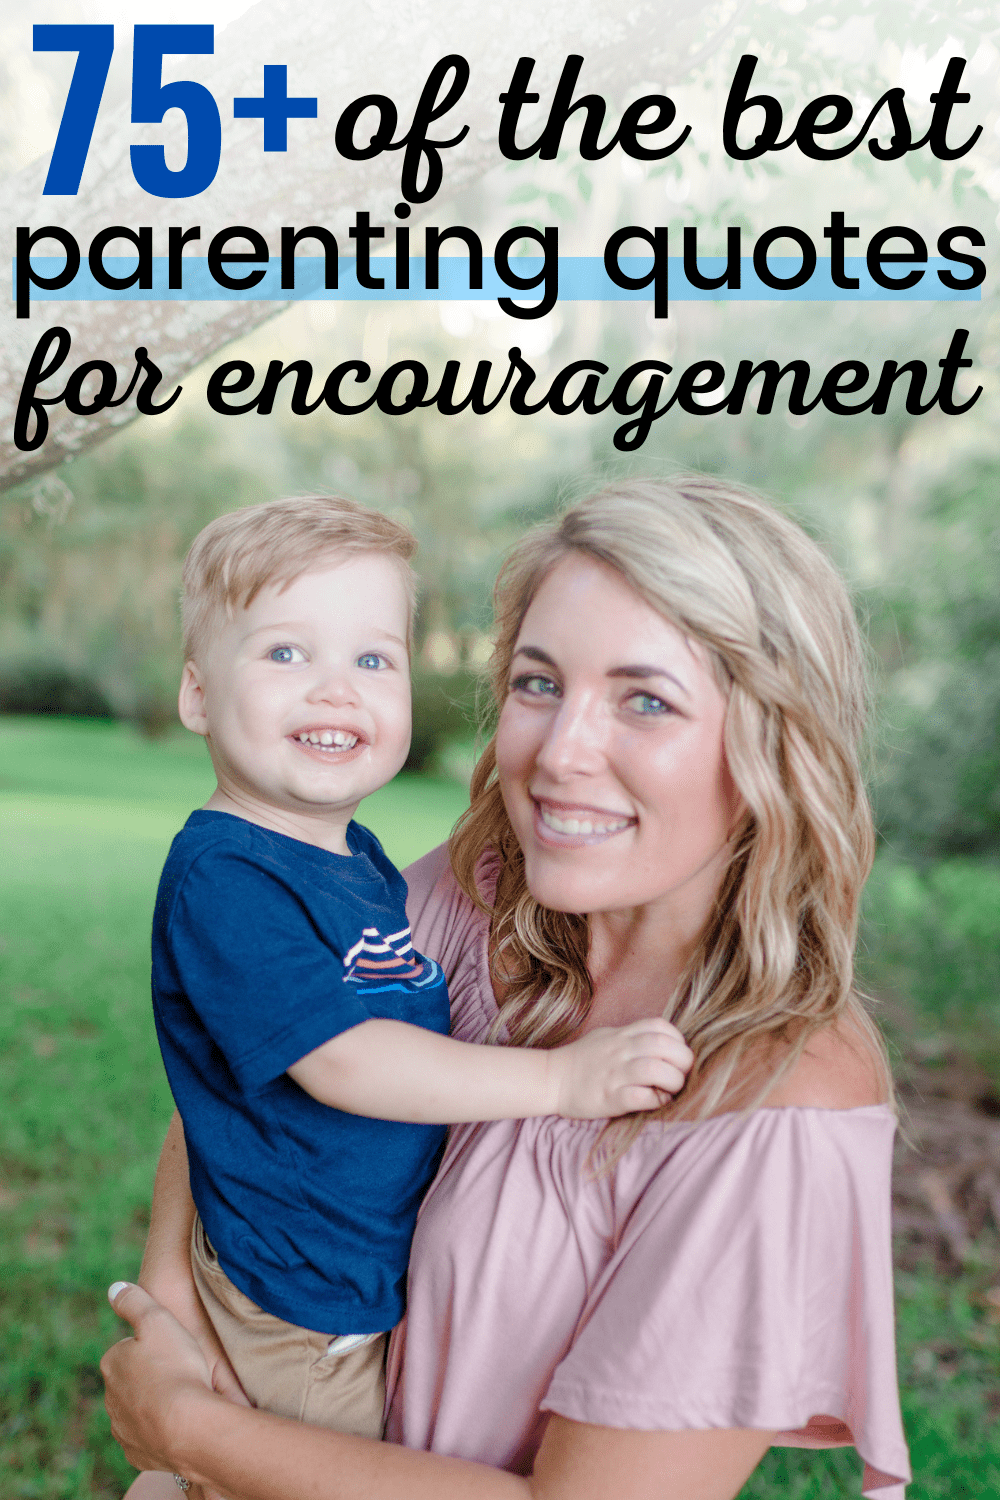 The best parent quotes help to inspire, encourage, and entertain you as you work through the joys and challenges of parenthood!